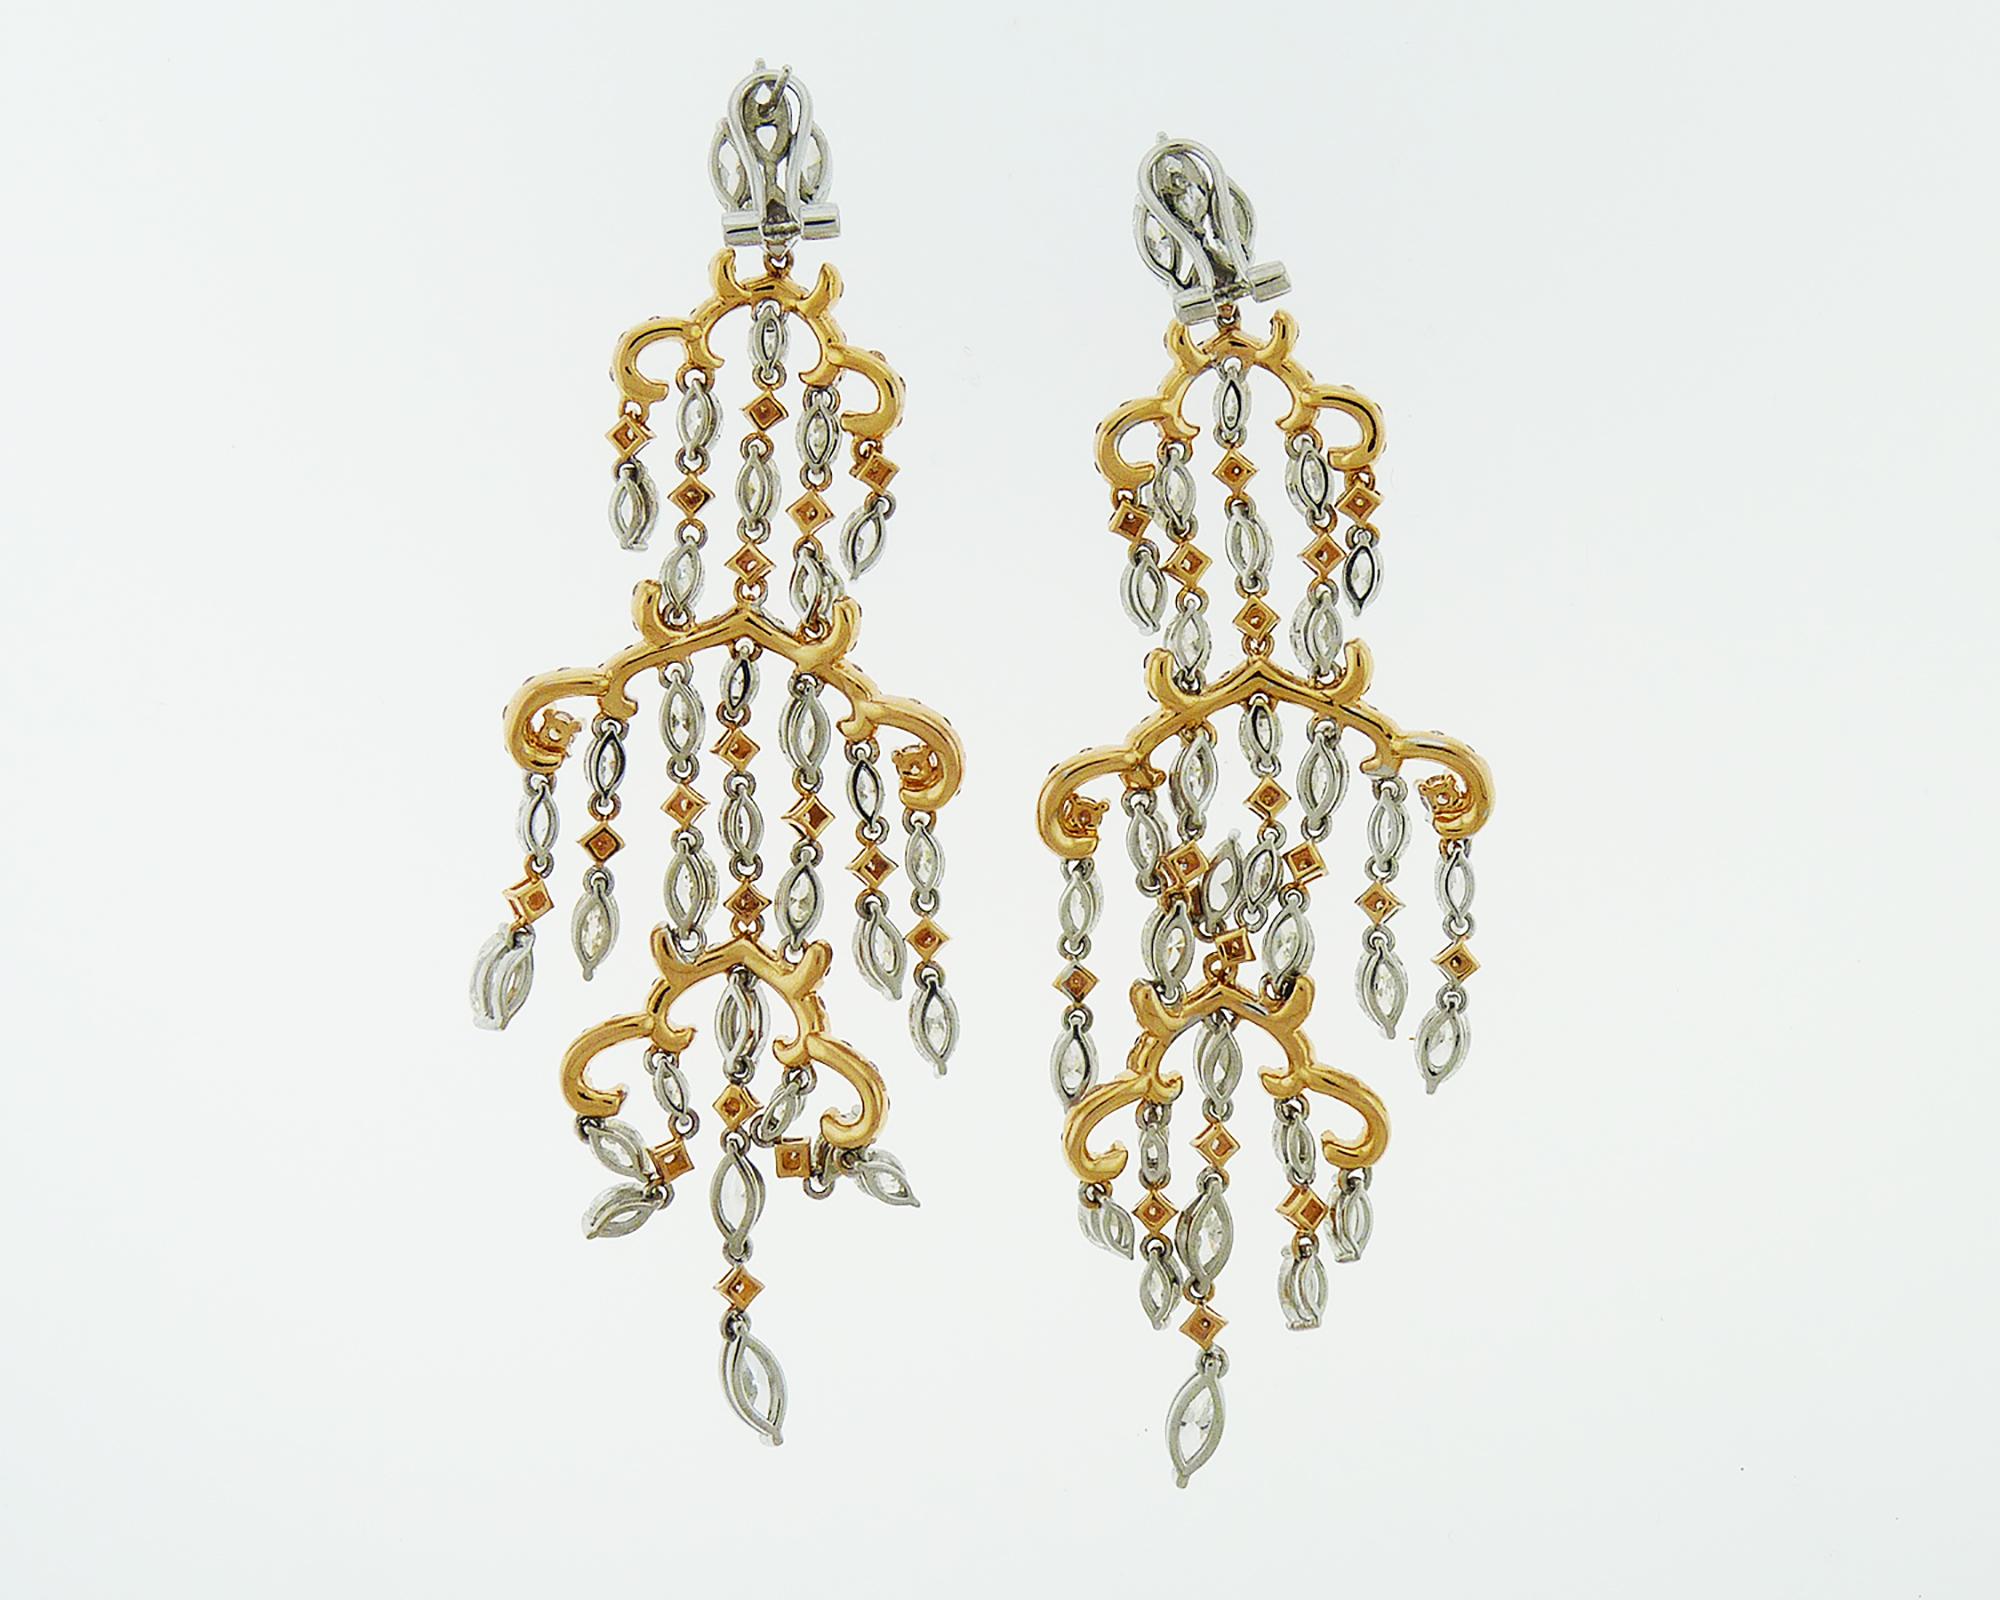 Stunning chandelier earrings featuring marquise and round diamonds weighing 20 carats total. The diamonds are equivalent to F-H colors, VS-SI clarity and mounted in white and rose gold. 
Weight of the earrings is 32.53 grams.
More pictures are